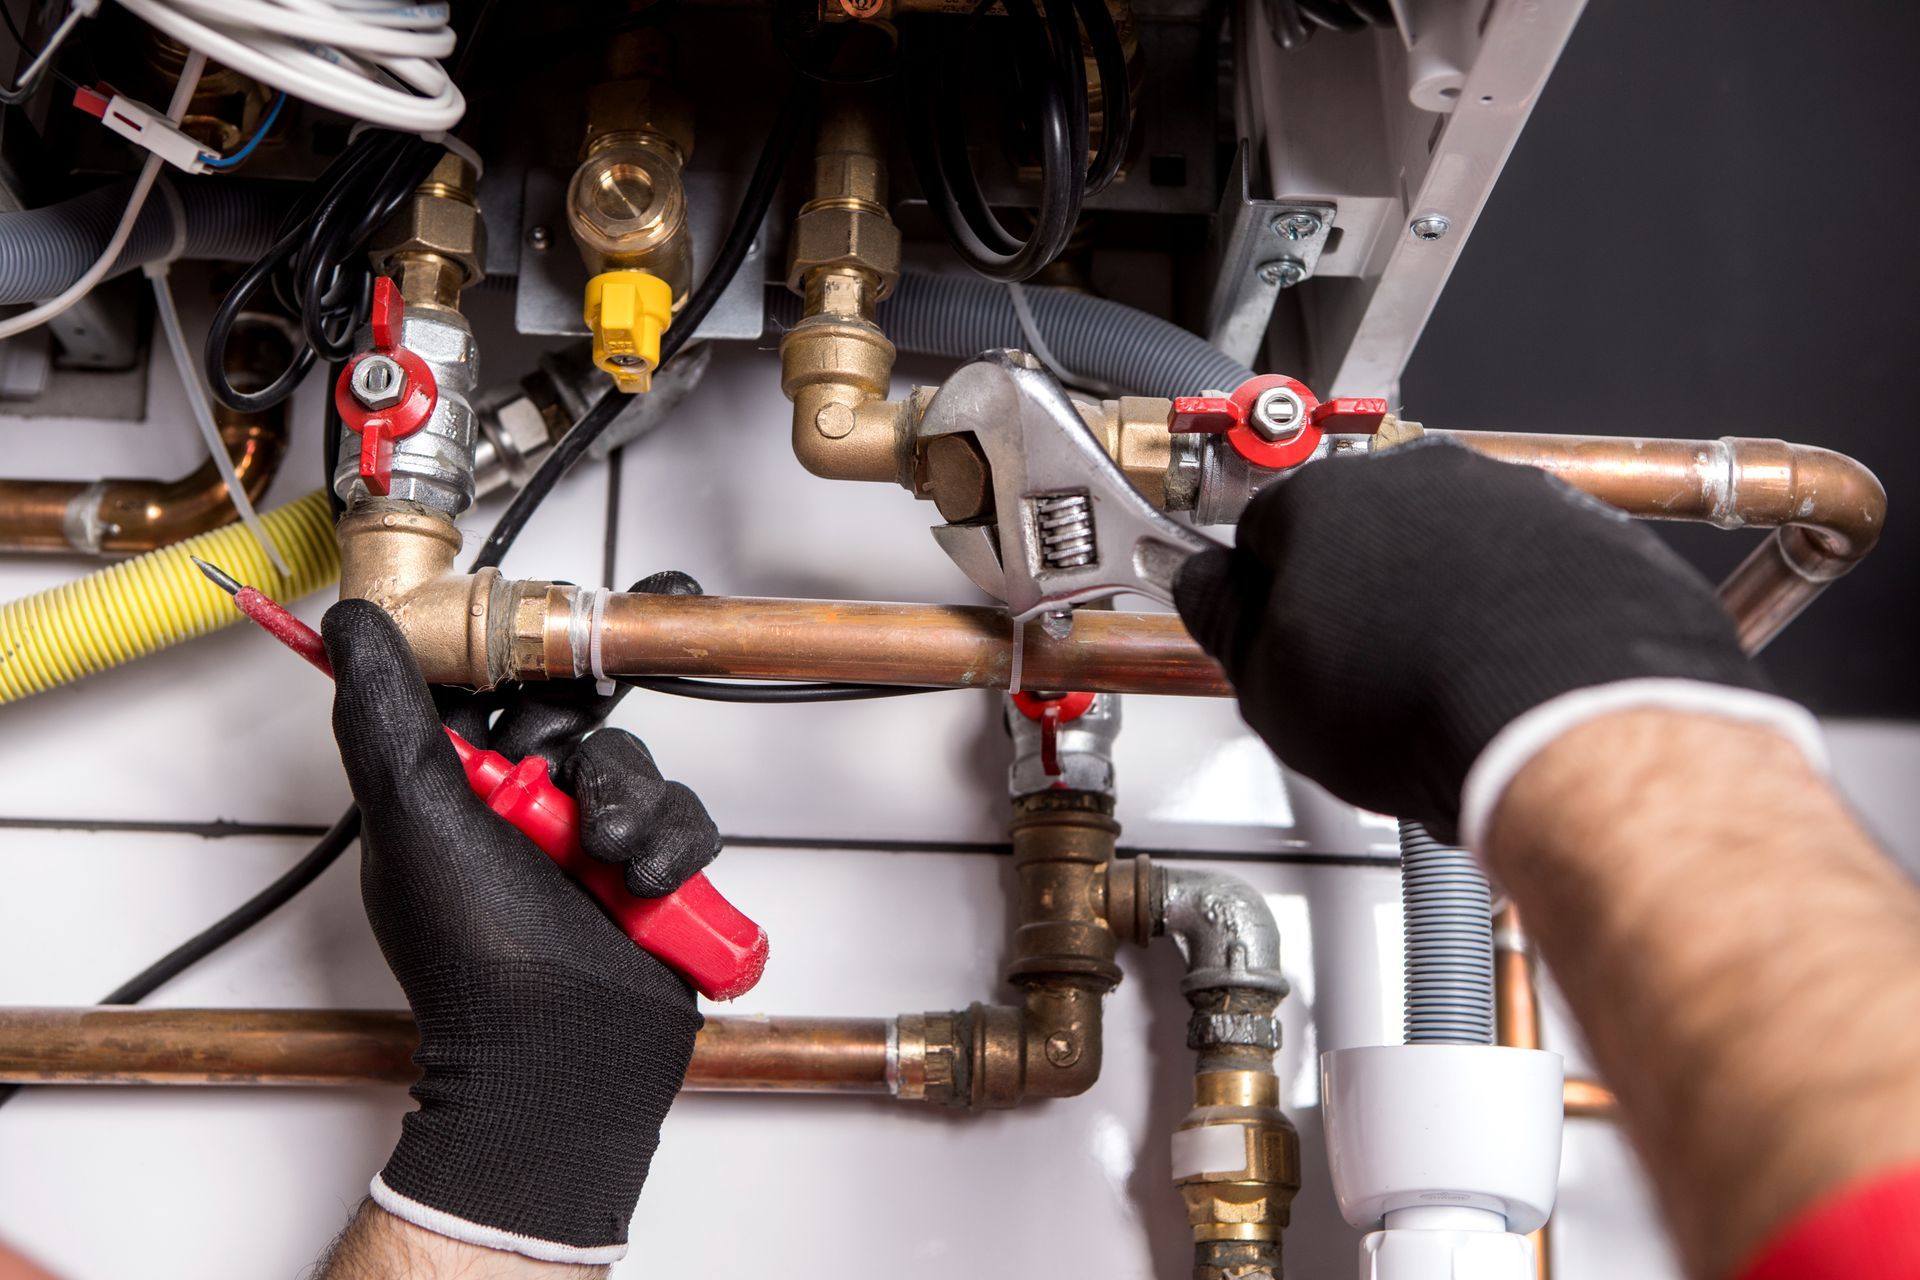 Professional plumber repairing a central heating system with focused attention.